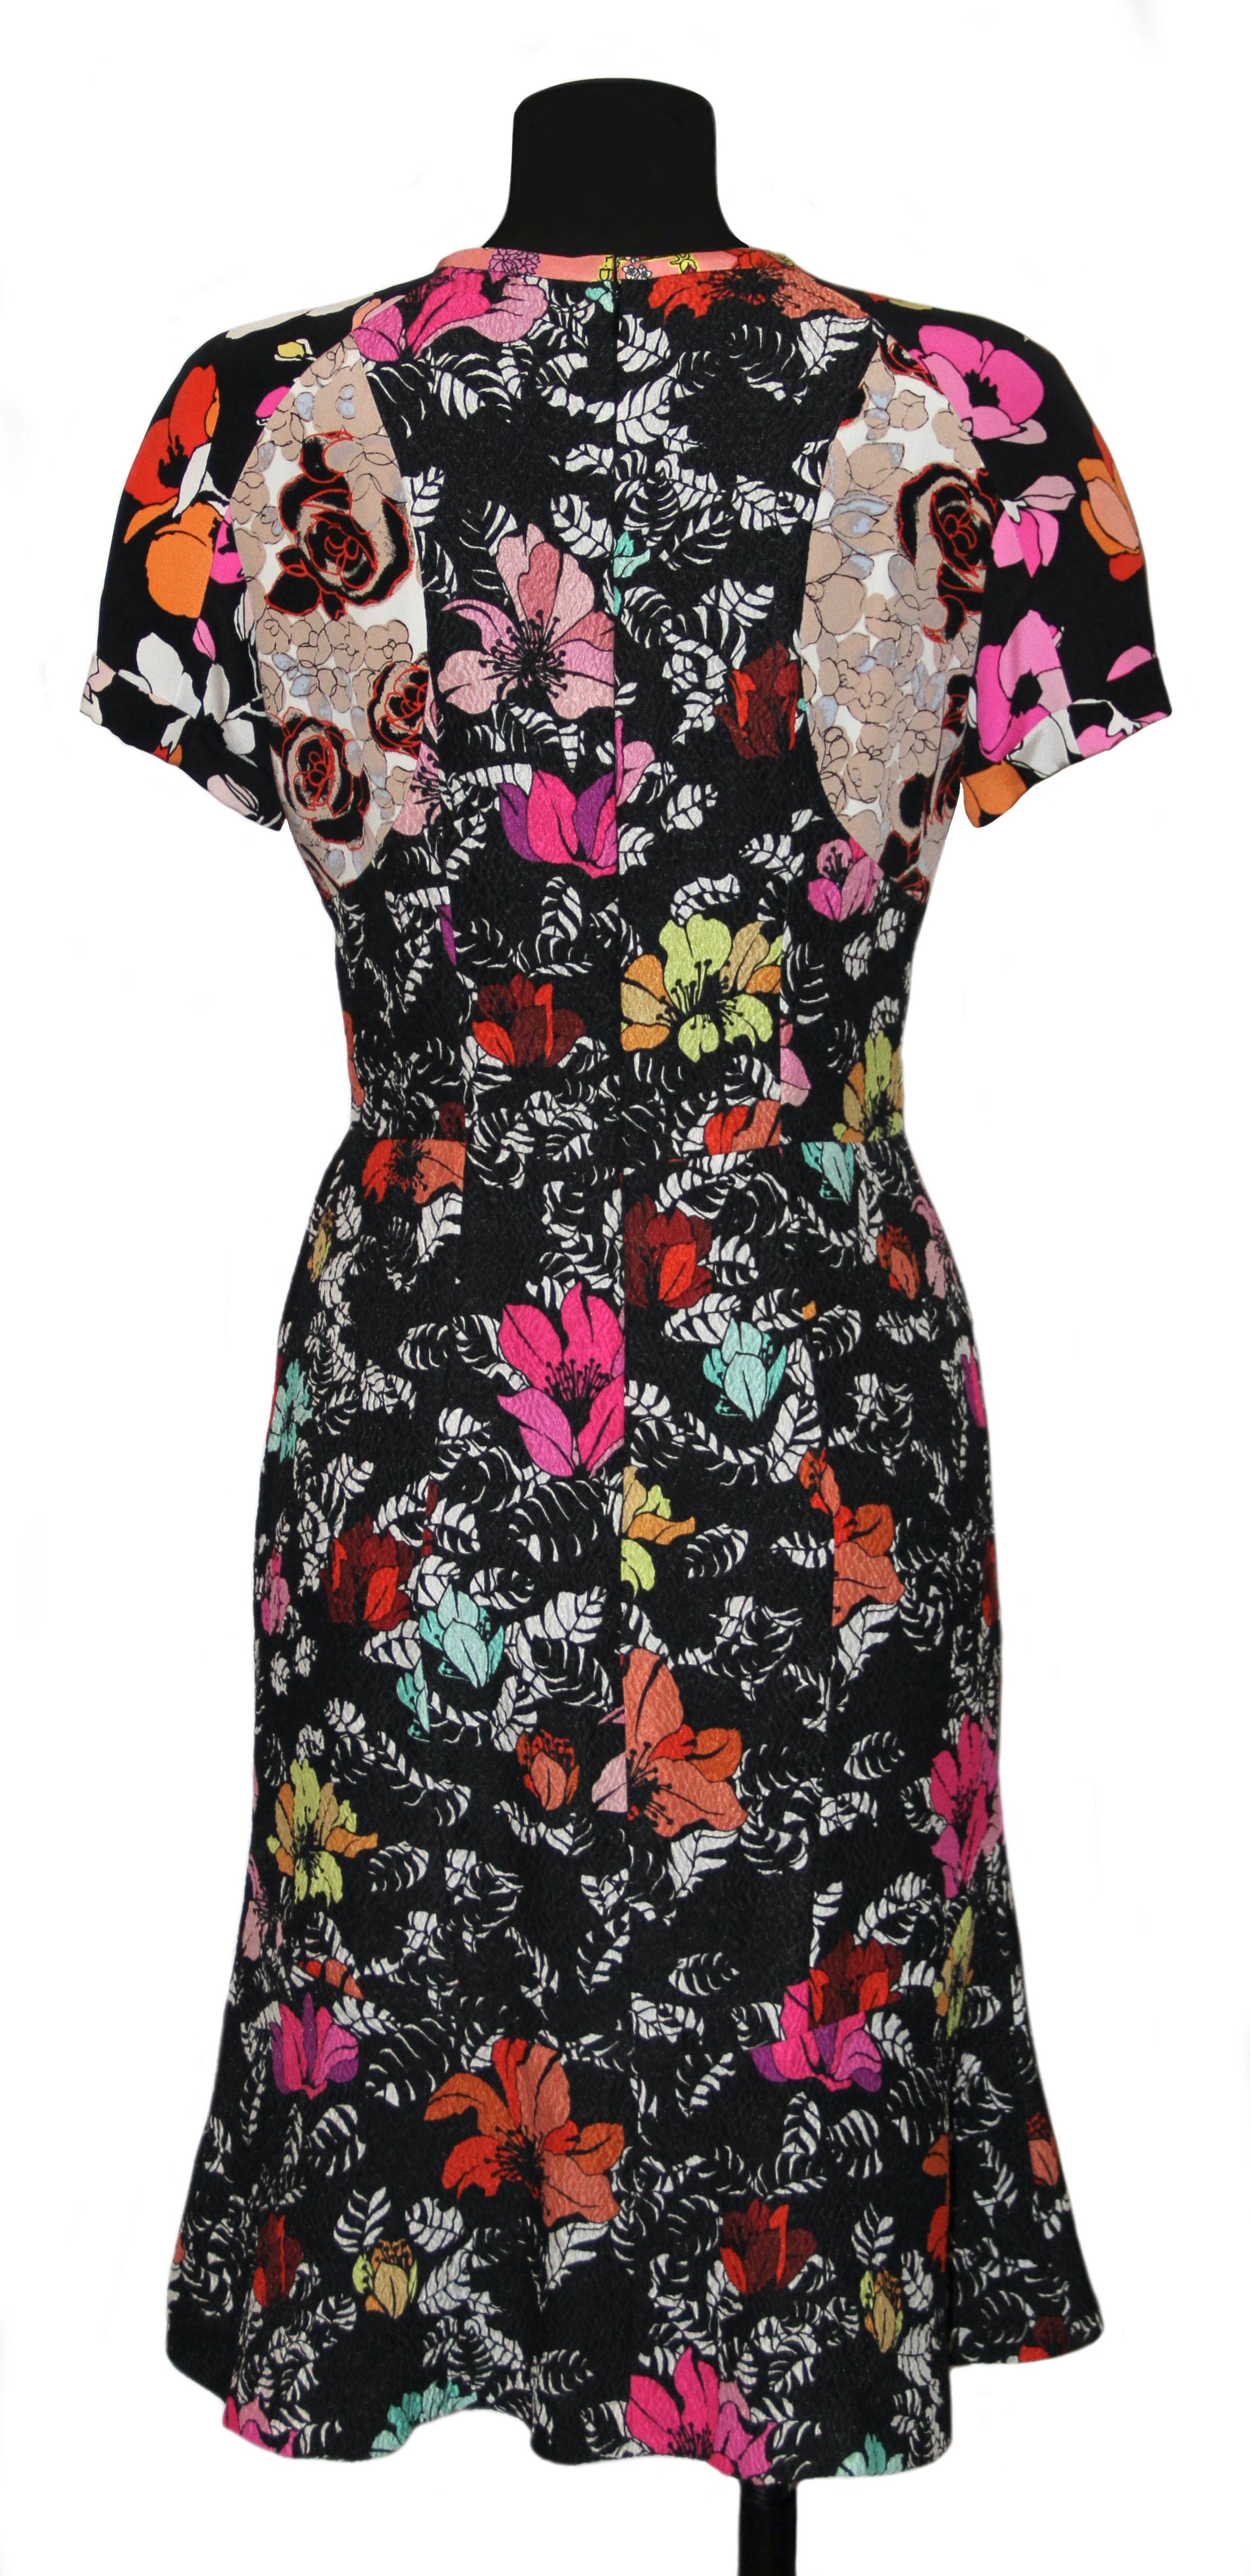 Beautiful and feminine silk dress from the house of Oscar de la Renta. 
It is slightly fitted at the waist, has a round neckline and small sleeves.
It features two flat front pockets.

Fabric. 84% silk, 16% nylon
Lining: 100% silk
Color: black and